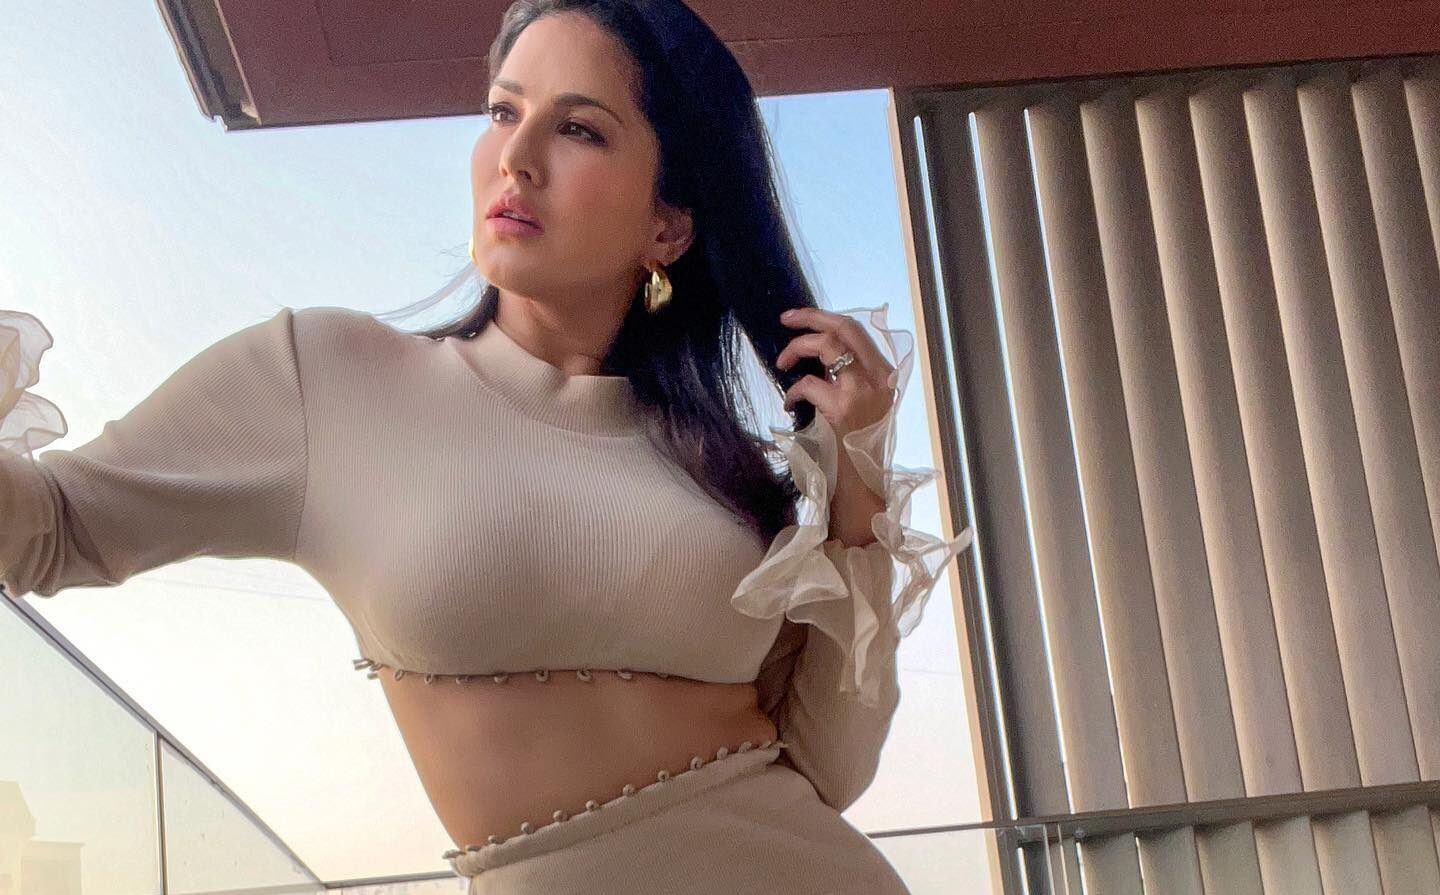 Sonali Leone - Sunny Leone said on doing porn films- 'I don't want anyone to follow this  path' - Bollywood Celebrity News